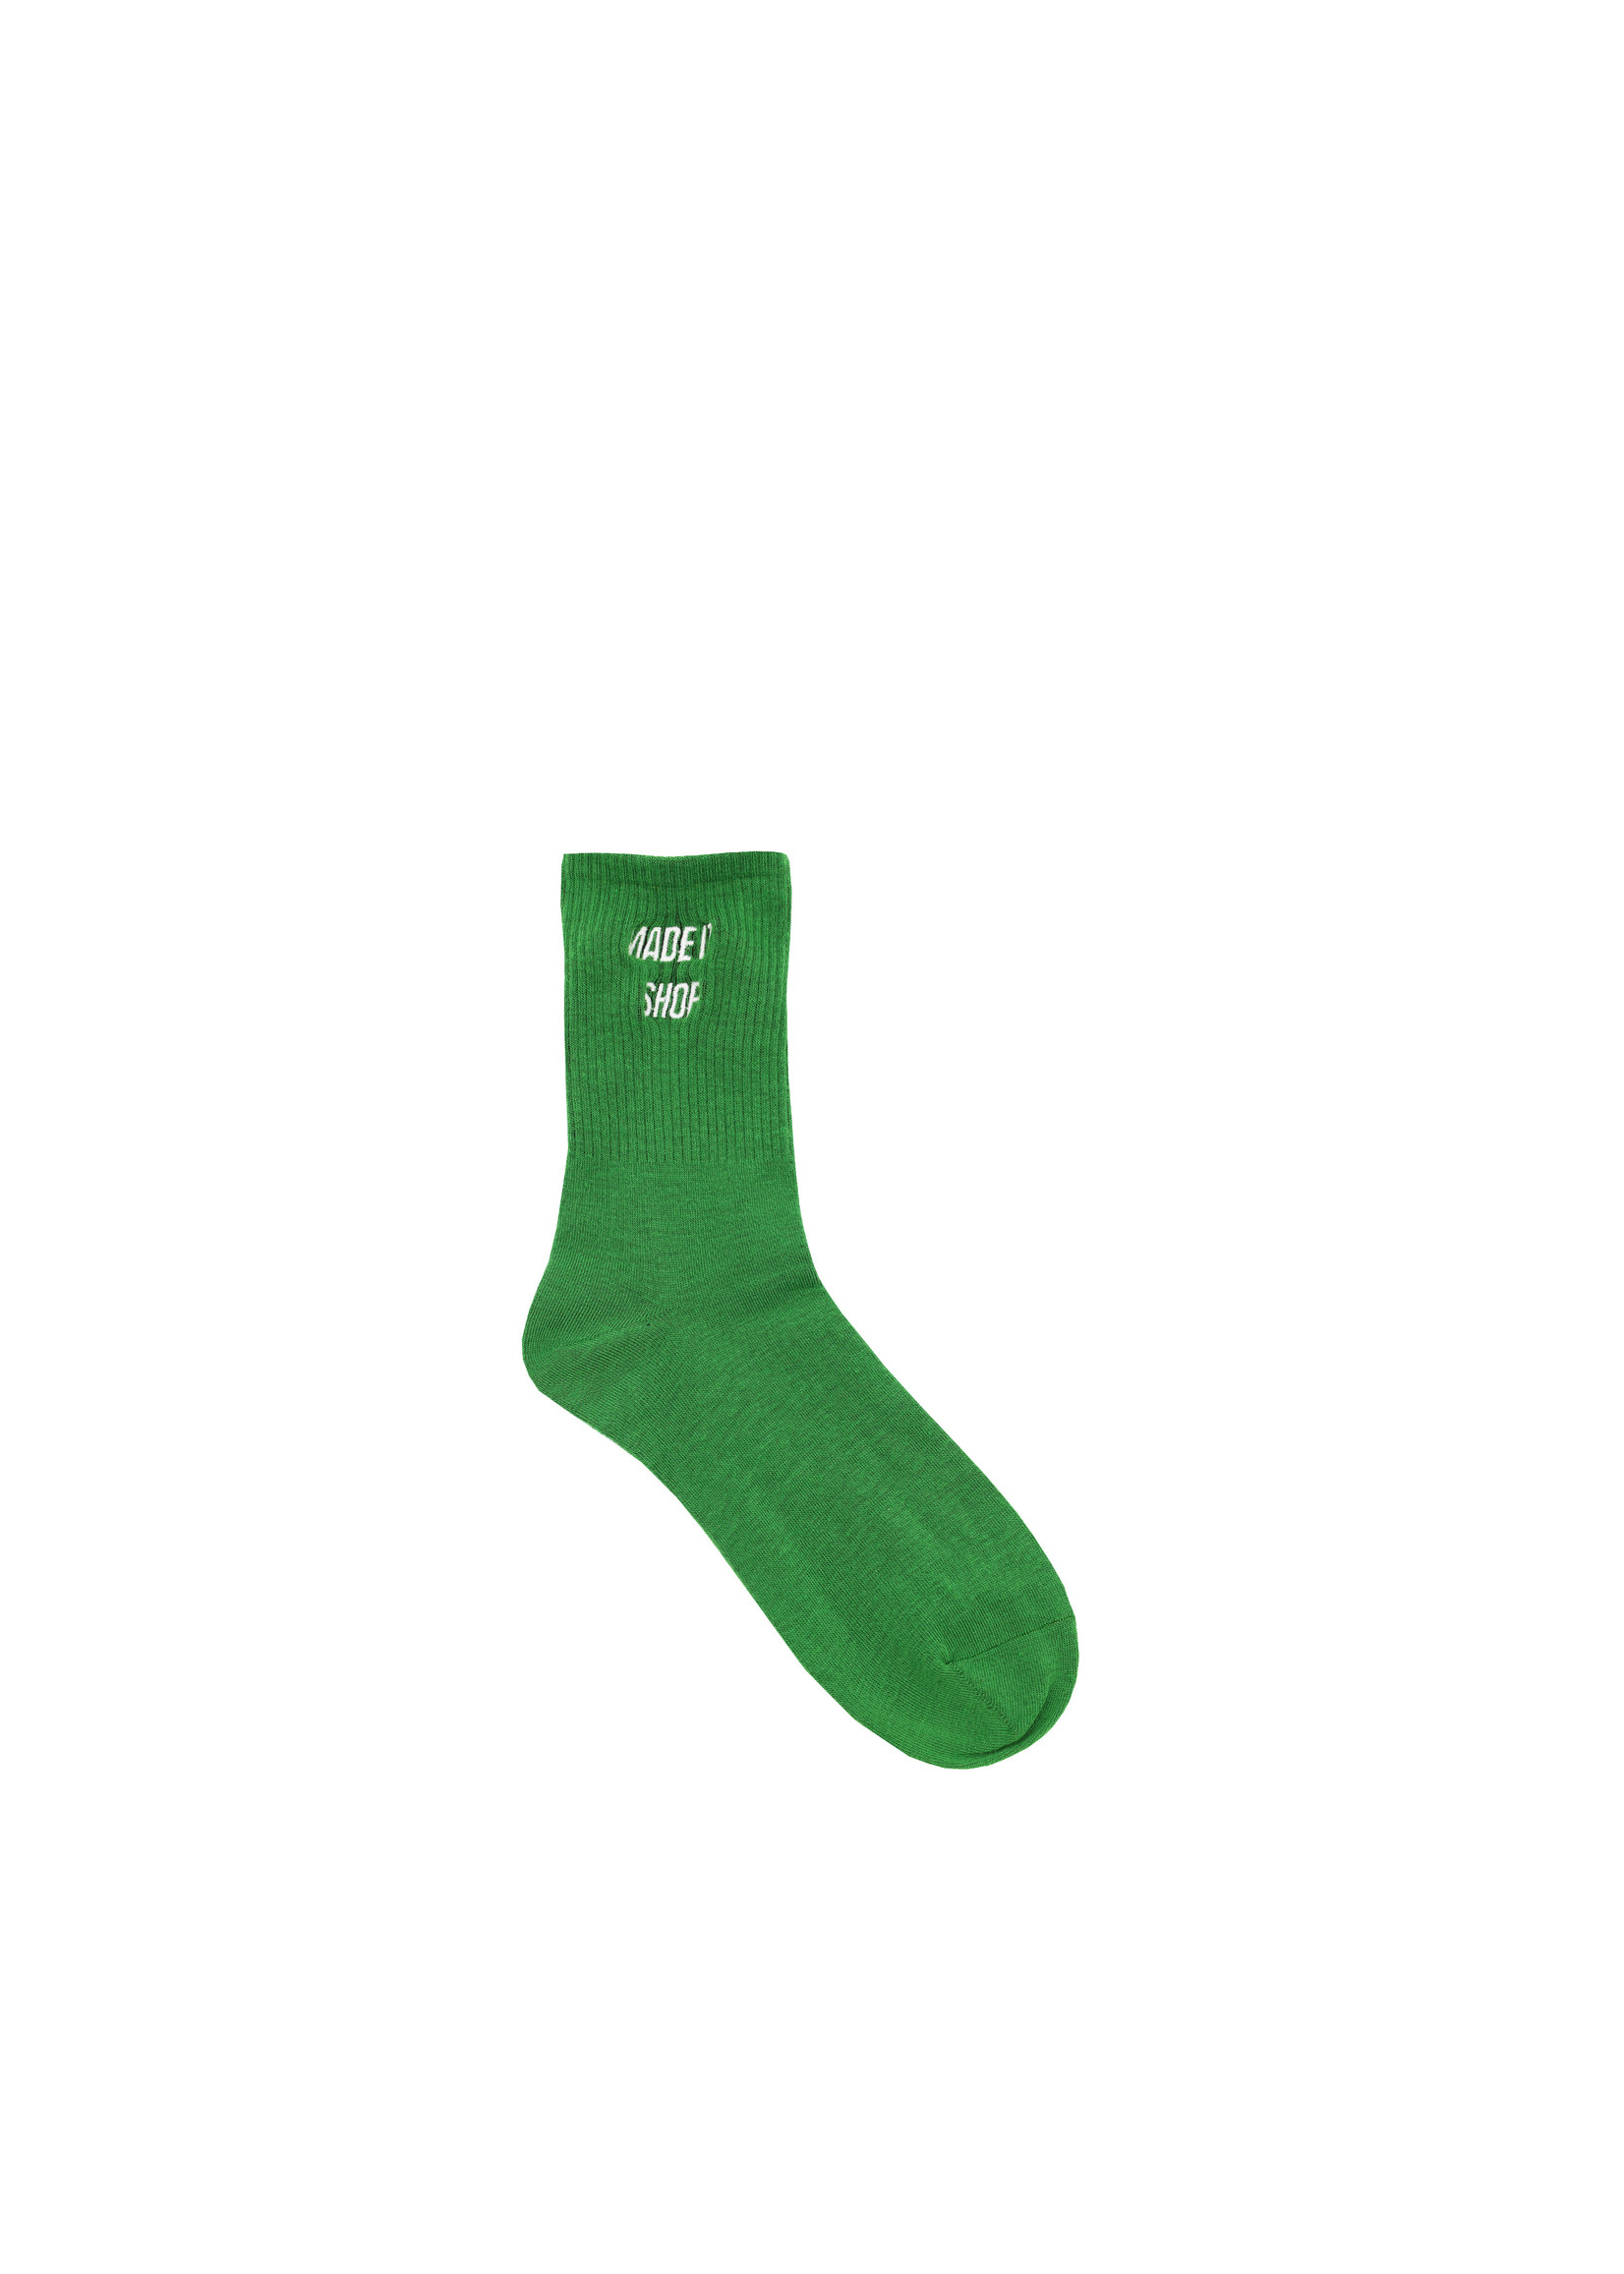 Made It Shop Made It Shop "Green/White" Socks